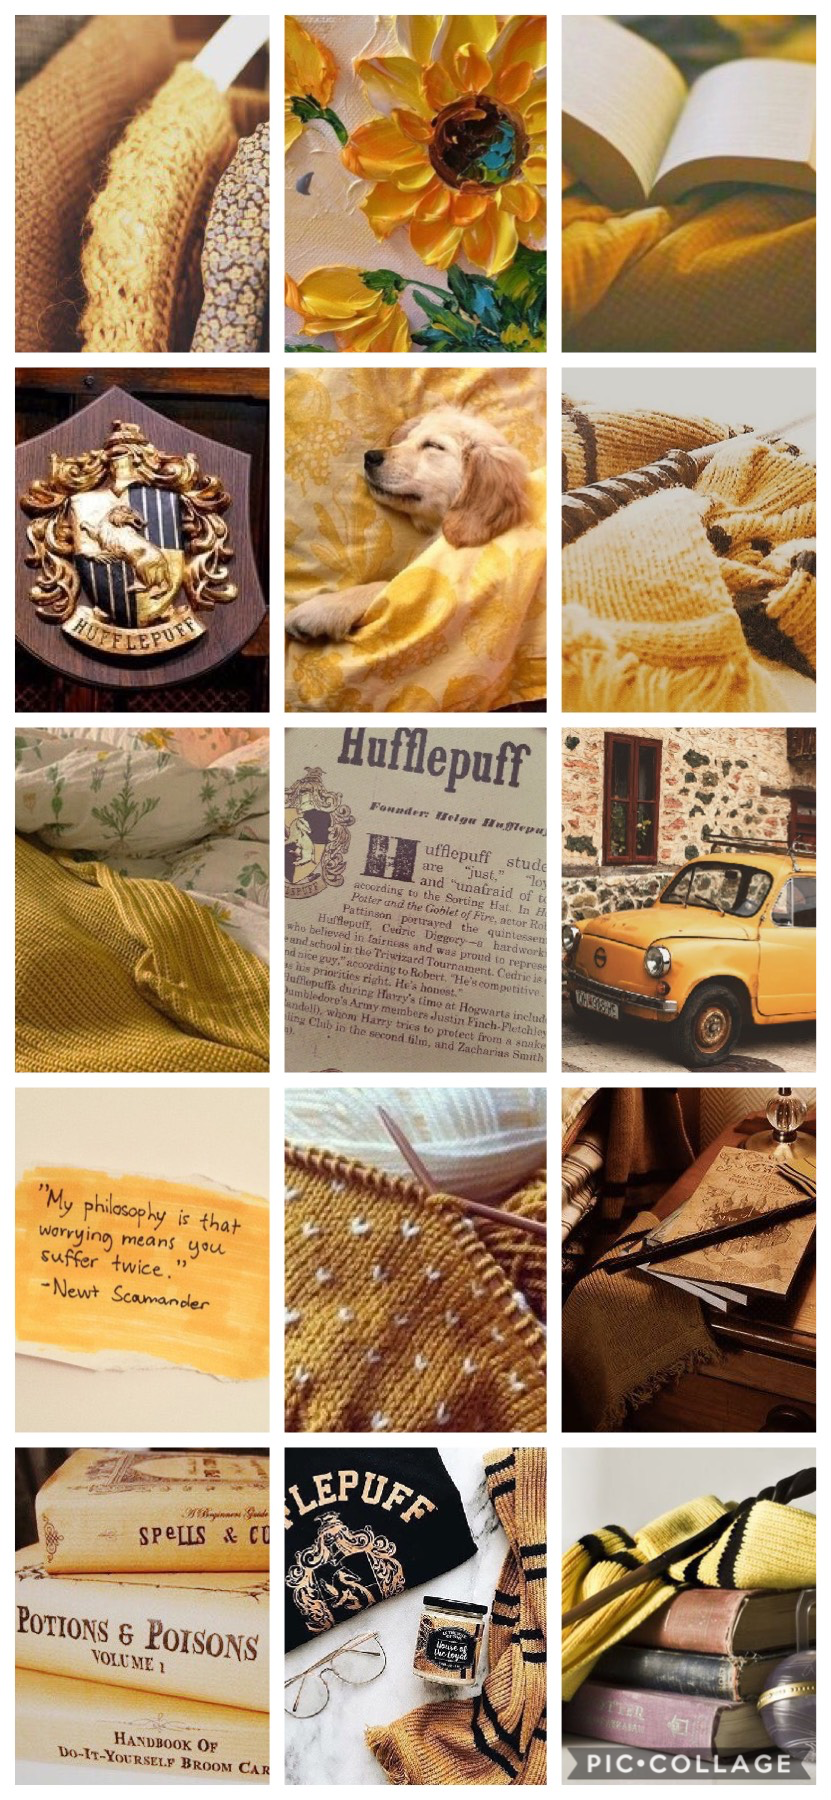 Turns out I’m actually a hufflepuff